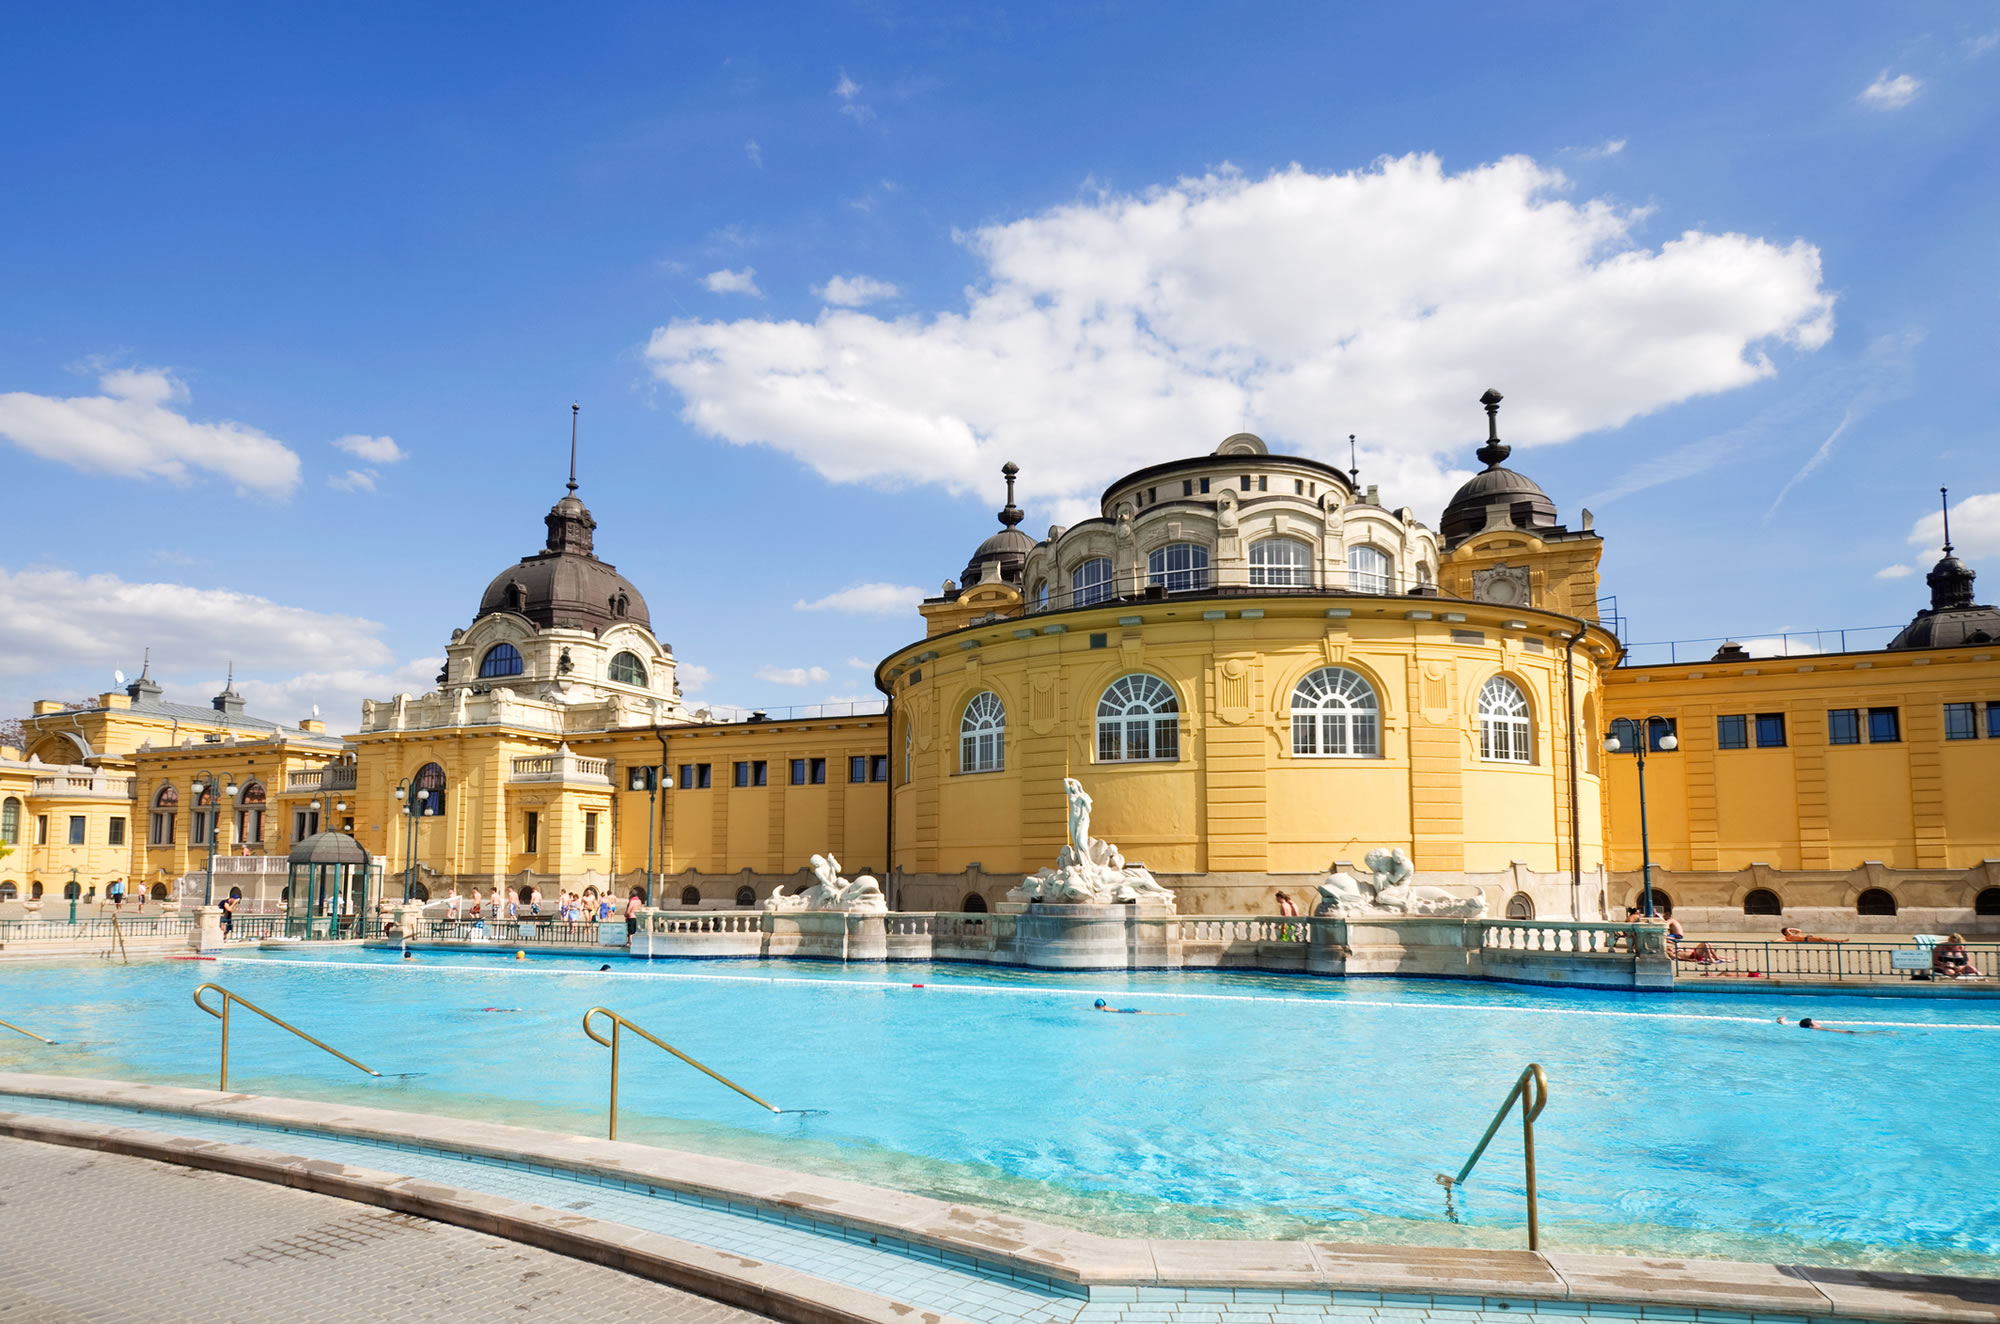 Take an Outdoor Bath in Budapest